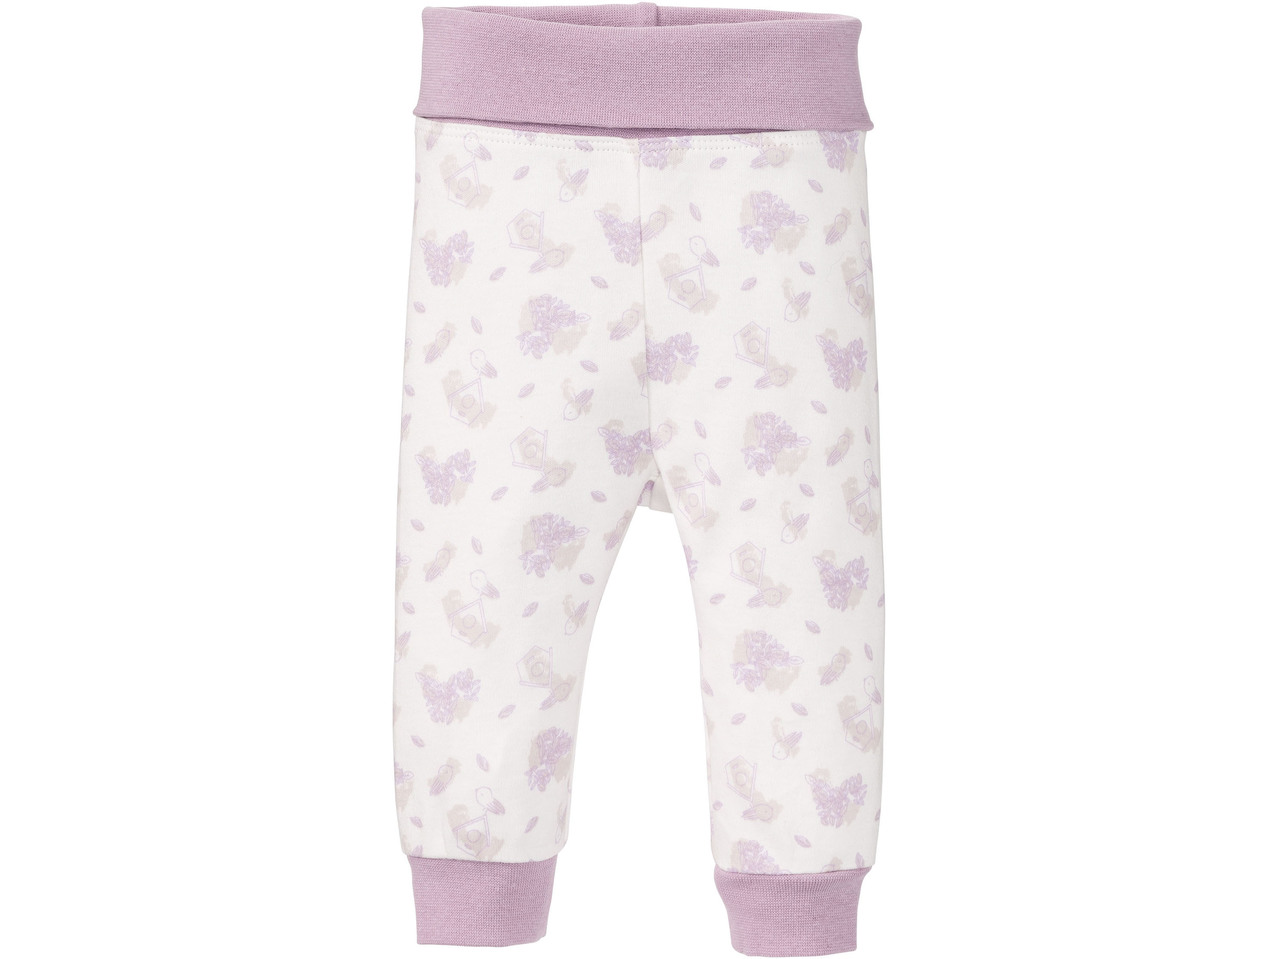 Baby Joggers, 2 pieces